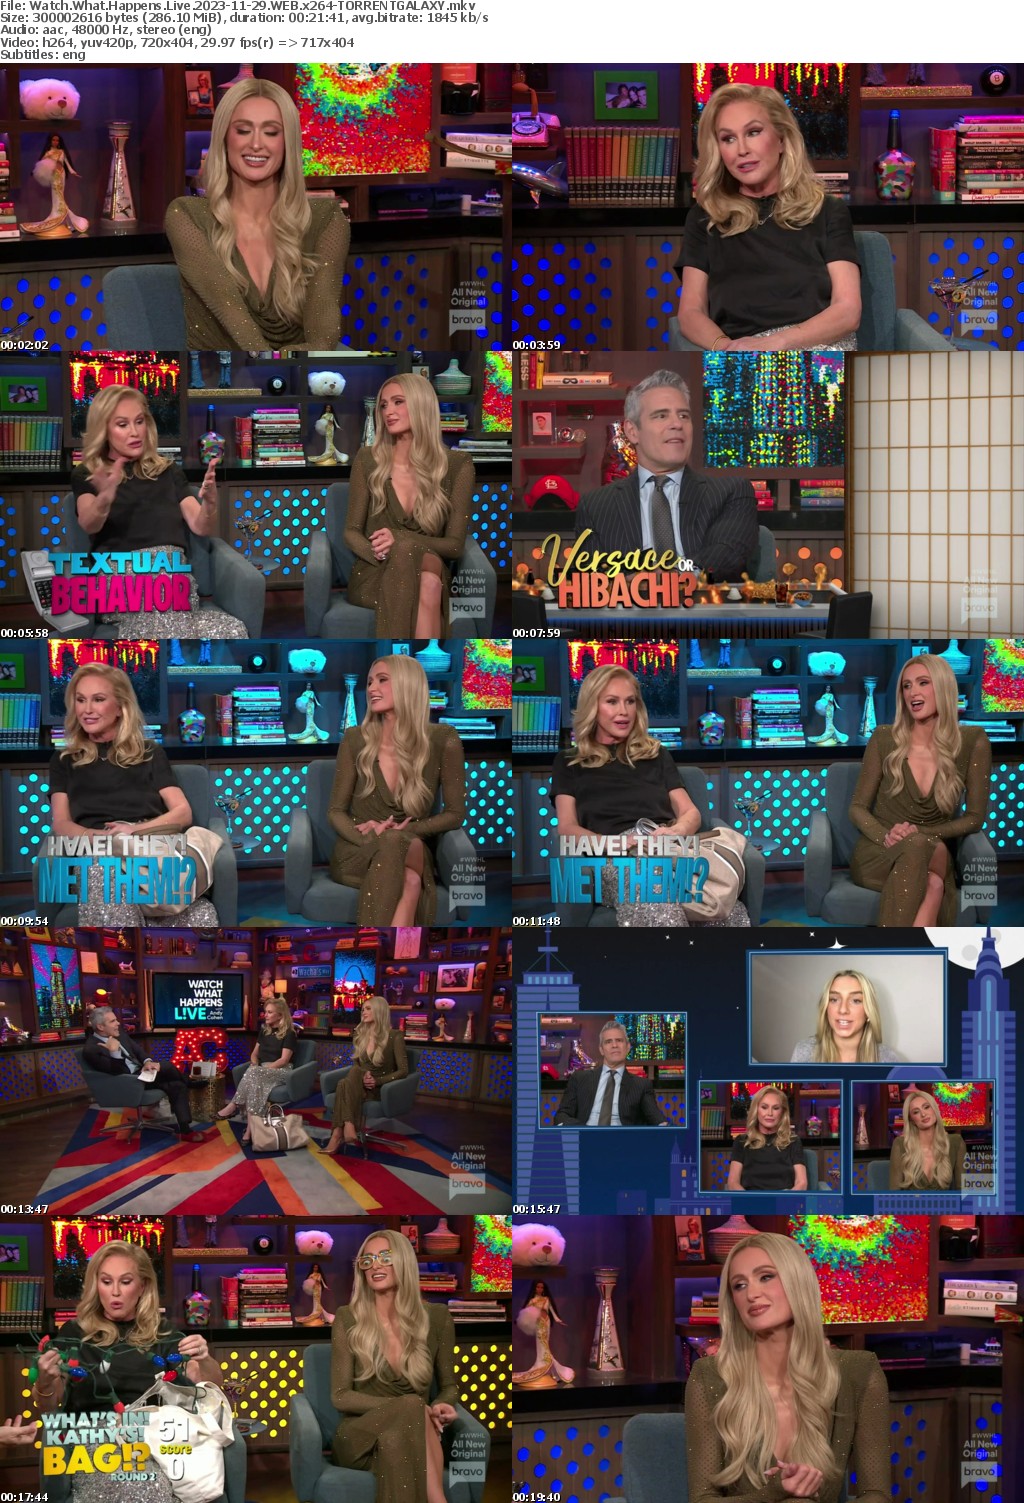 Watch What Happens Live 2023-11-29 WEB x264-GALAXY